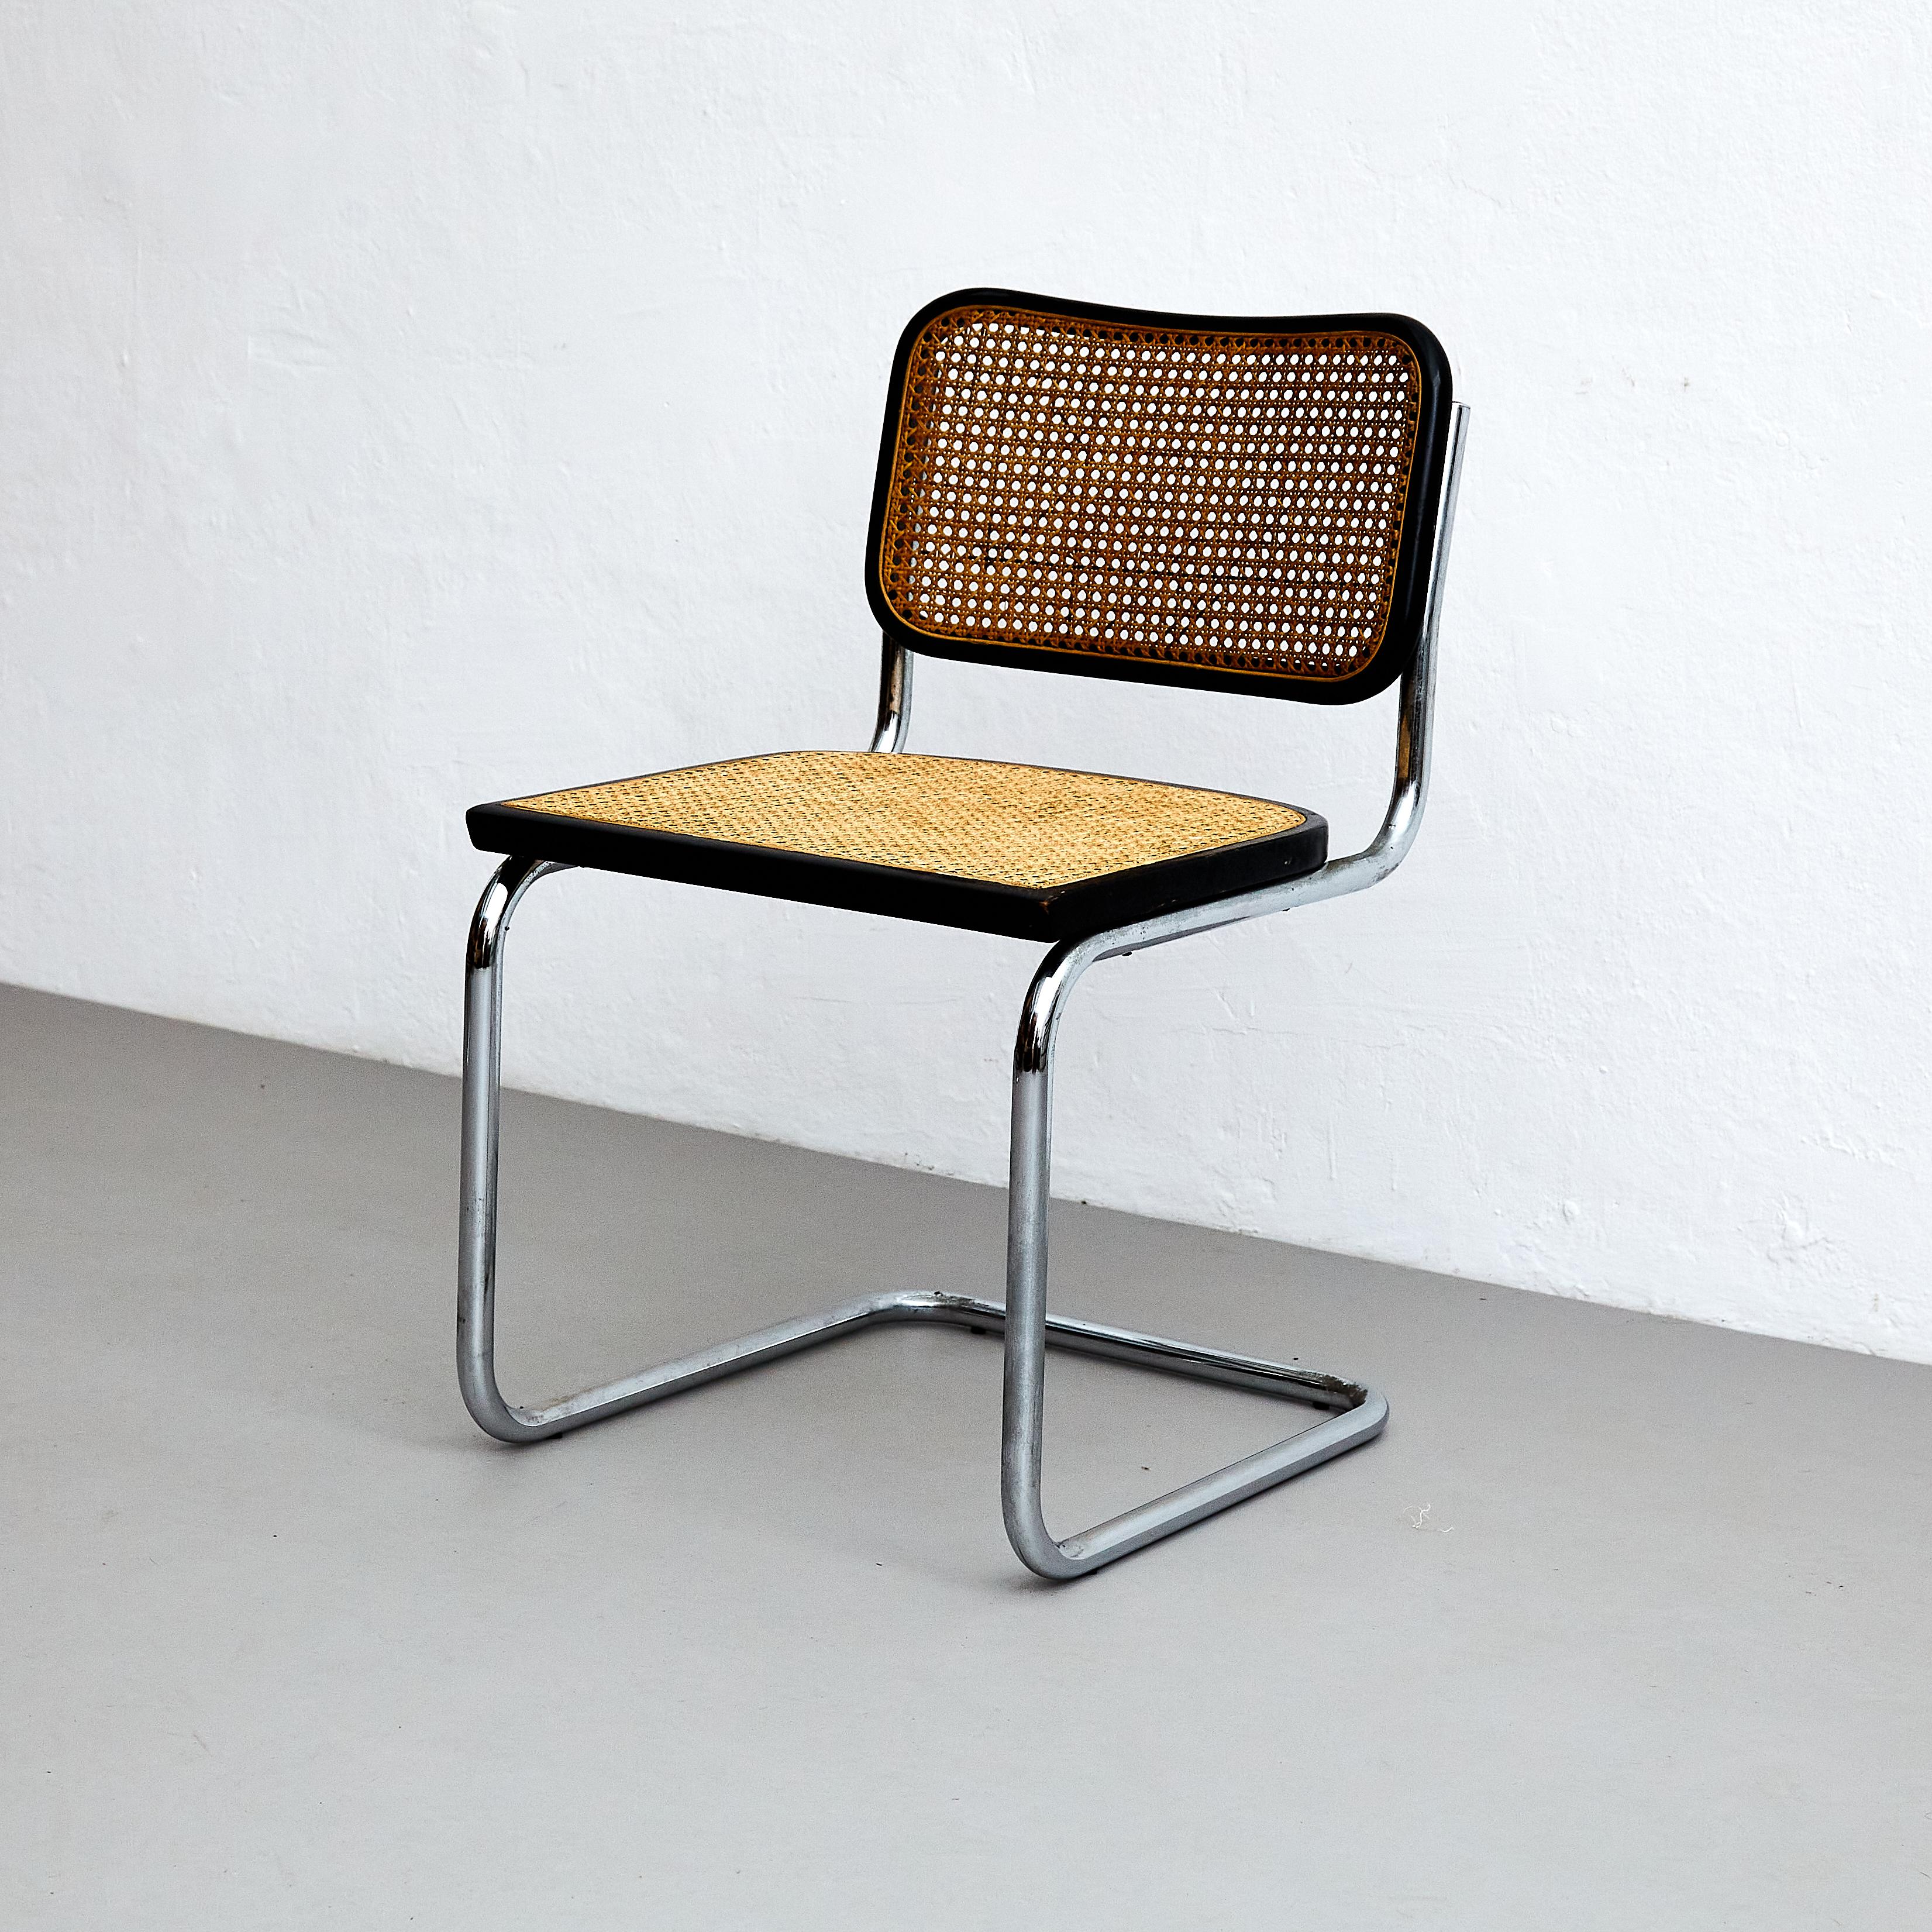 Set of 4 Marcel Breuer Cesca Metal and Wood Mid-Century Modern Chairs, C. 1960 For Sale 3